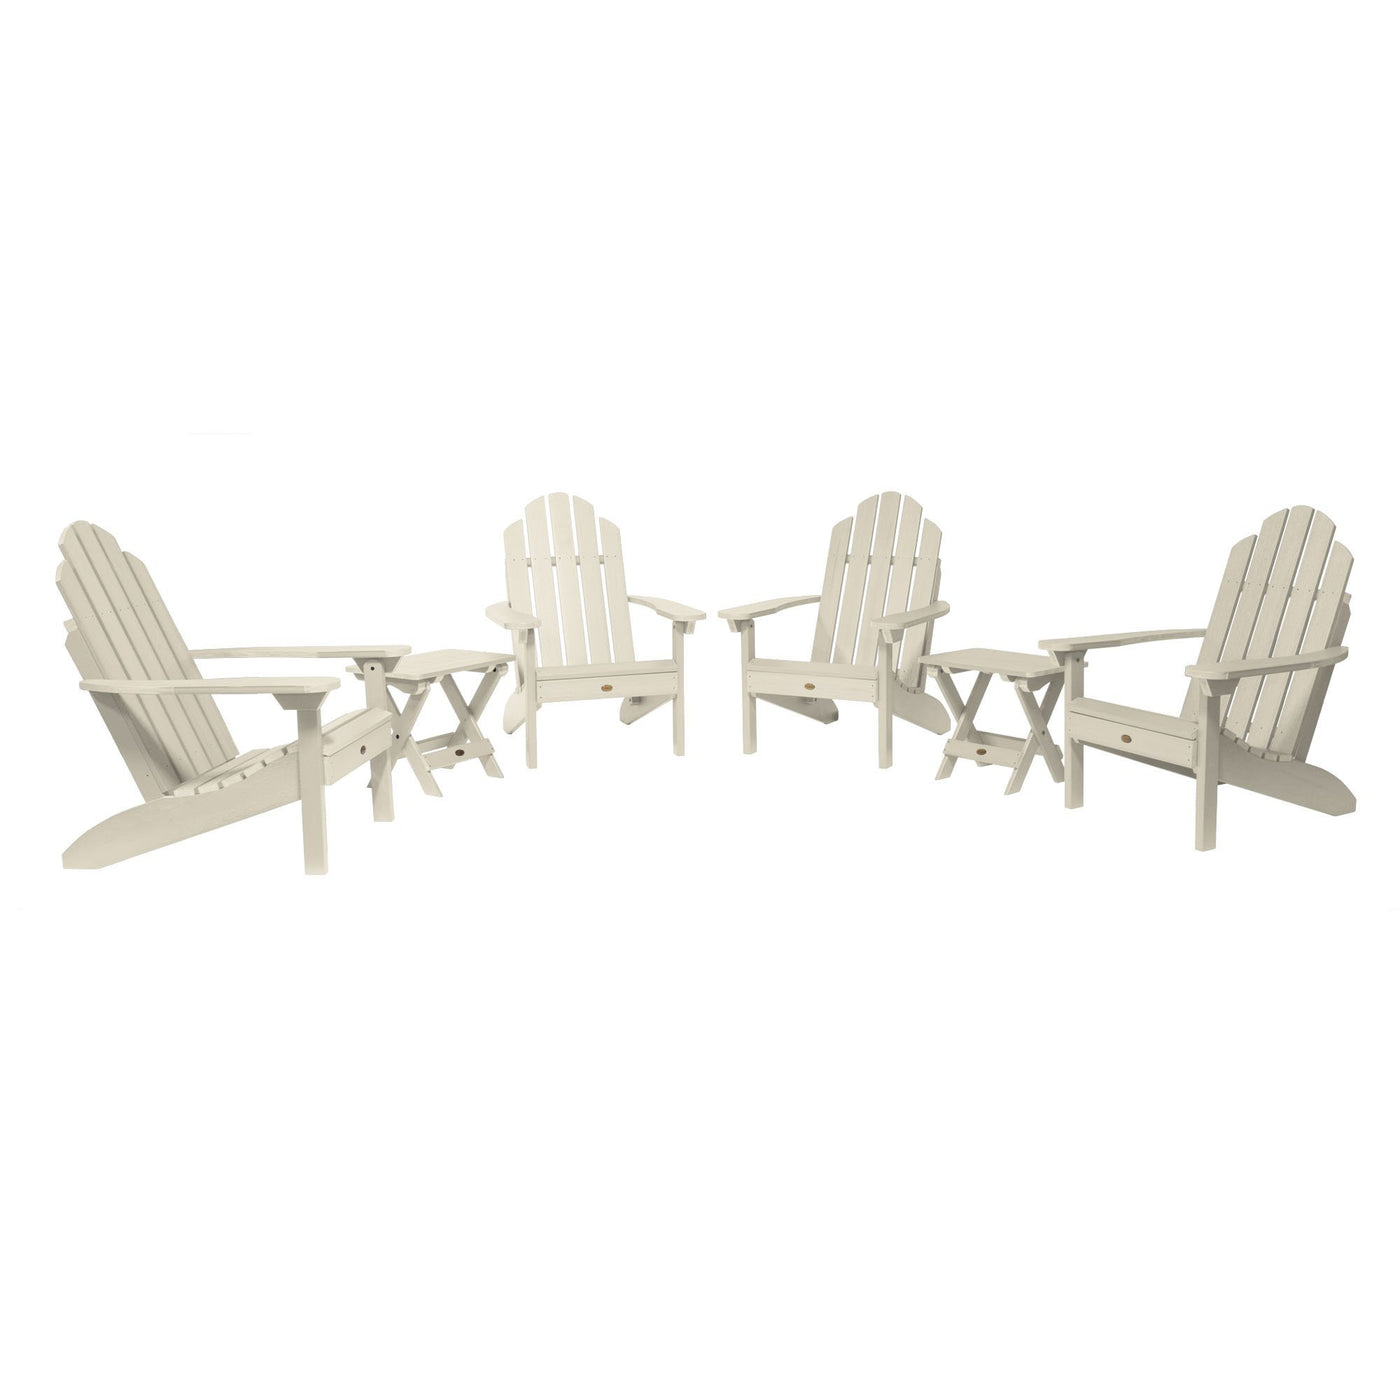 4 Classic Westport Adirondack Chairs with 2 Folding Side Tables Highwood USA Whitewash 